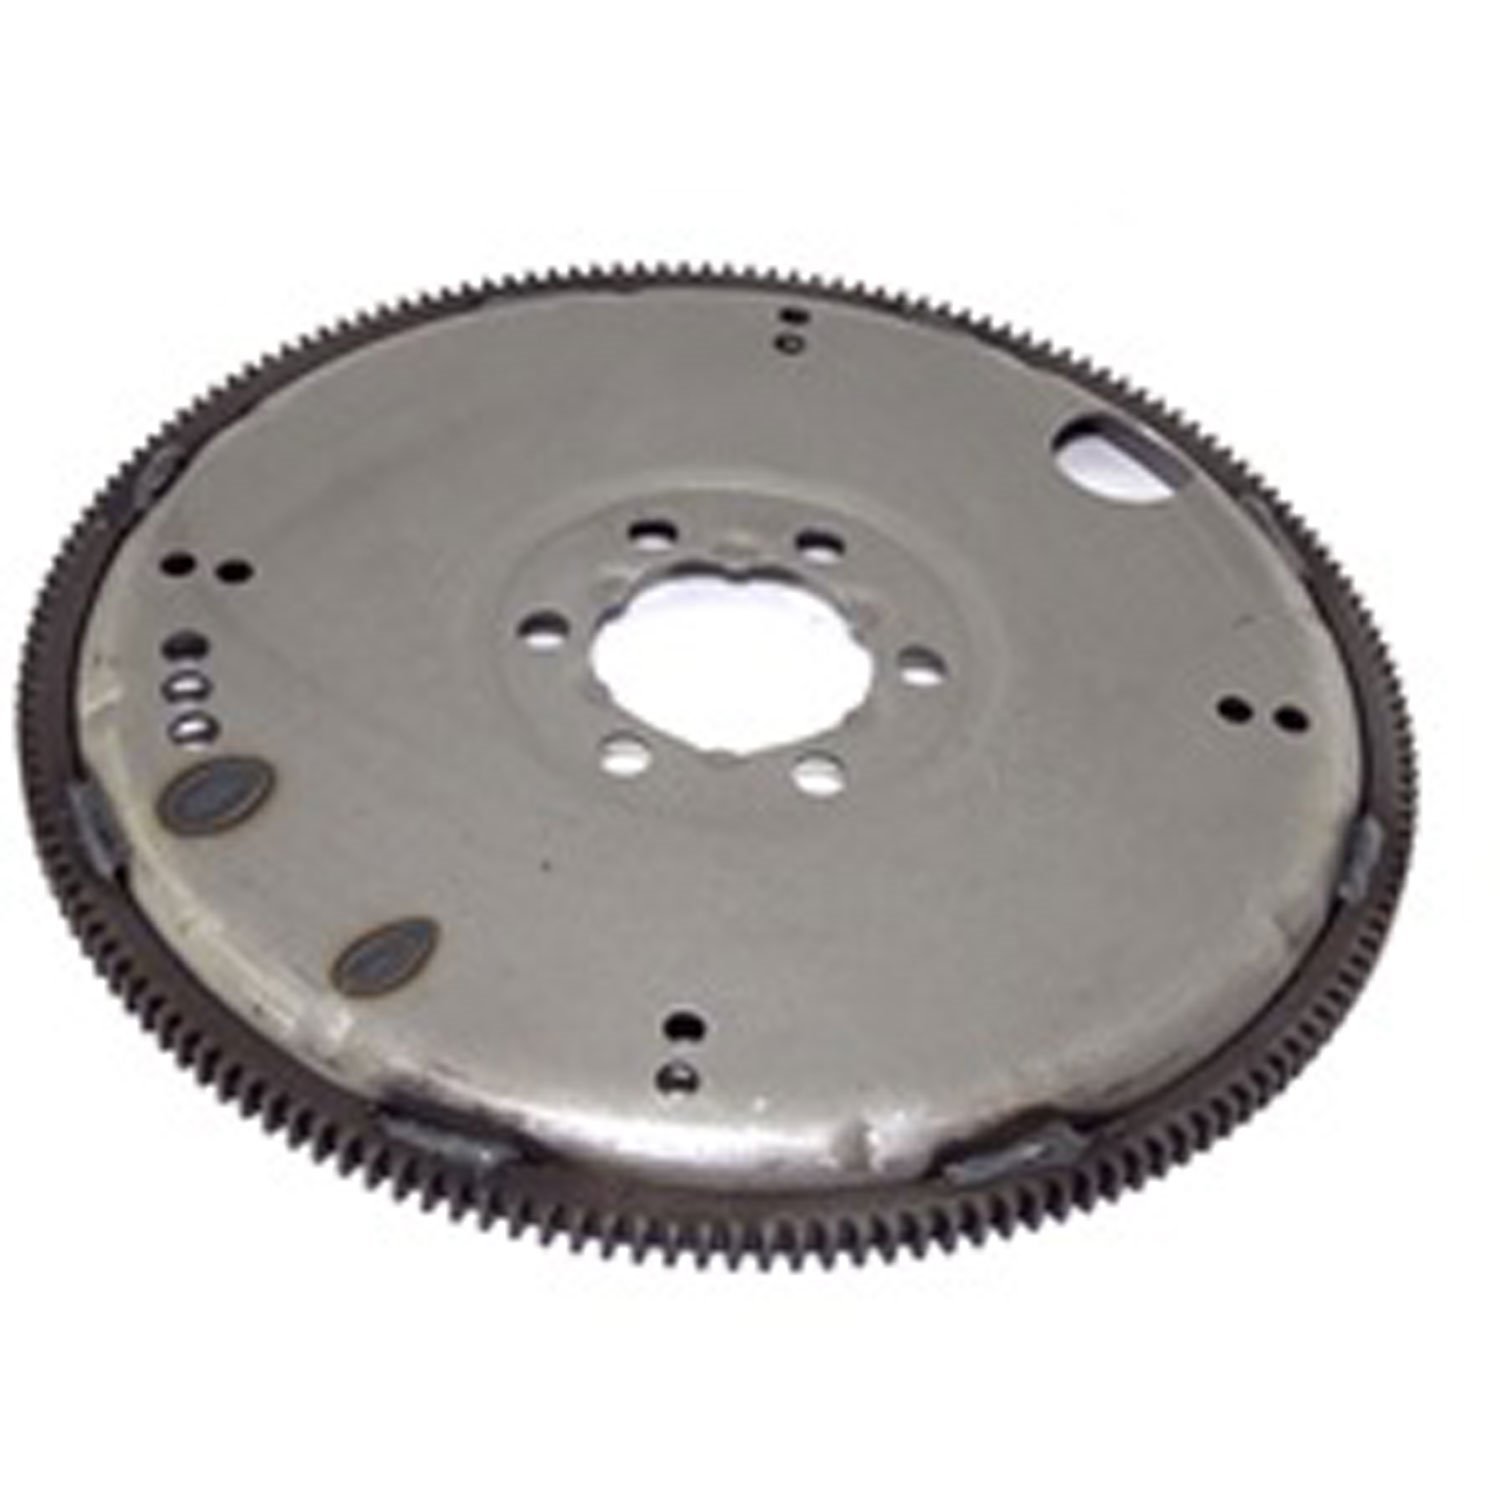 This automatic transmission flexplate from Omix-ADA fits 80-83 Jeep CJ and SJ models with V8 engines.